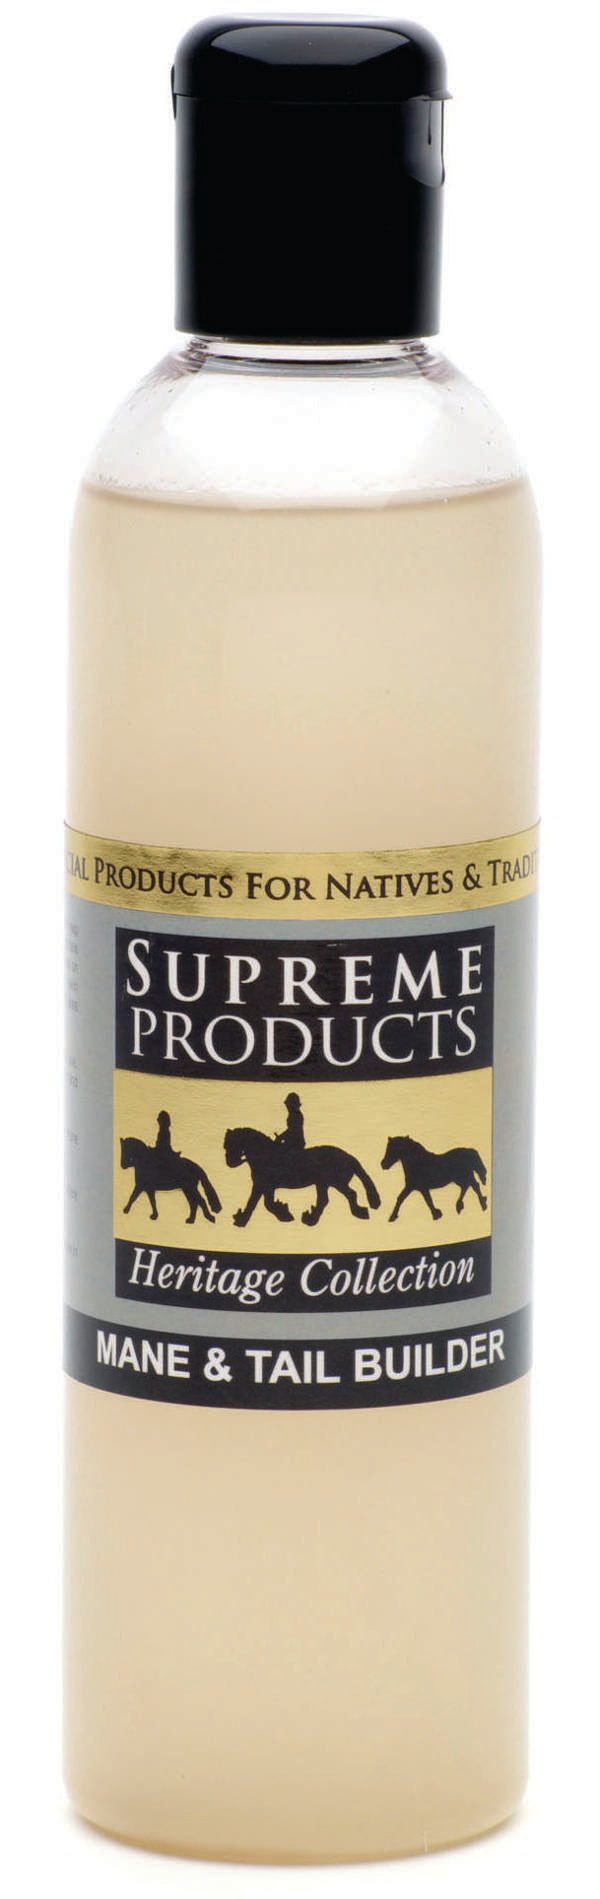 Supreme Products Mane & Tail Builder 250ml